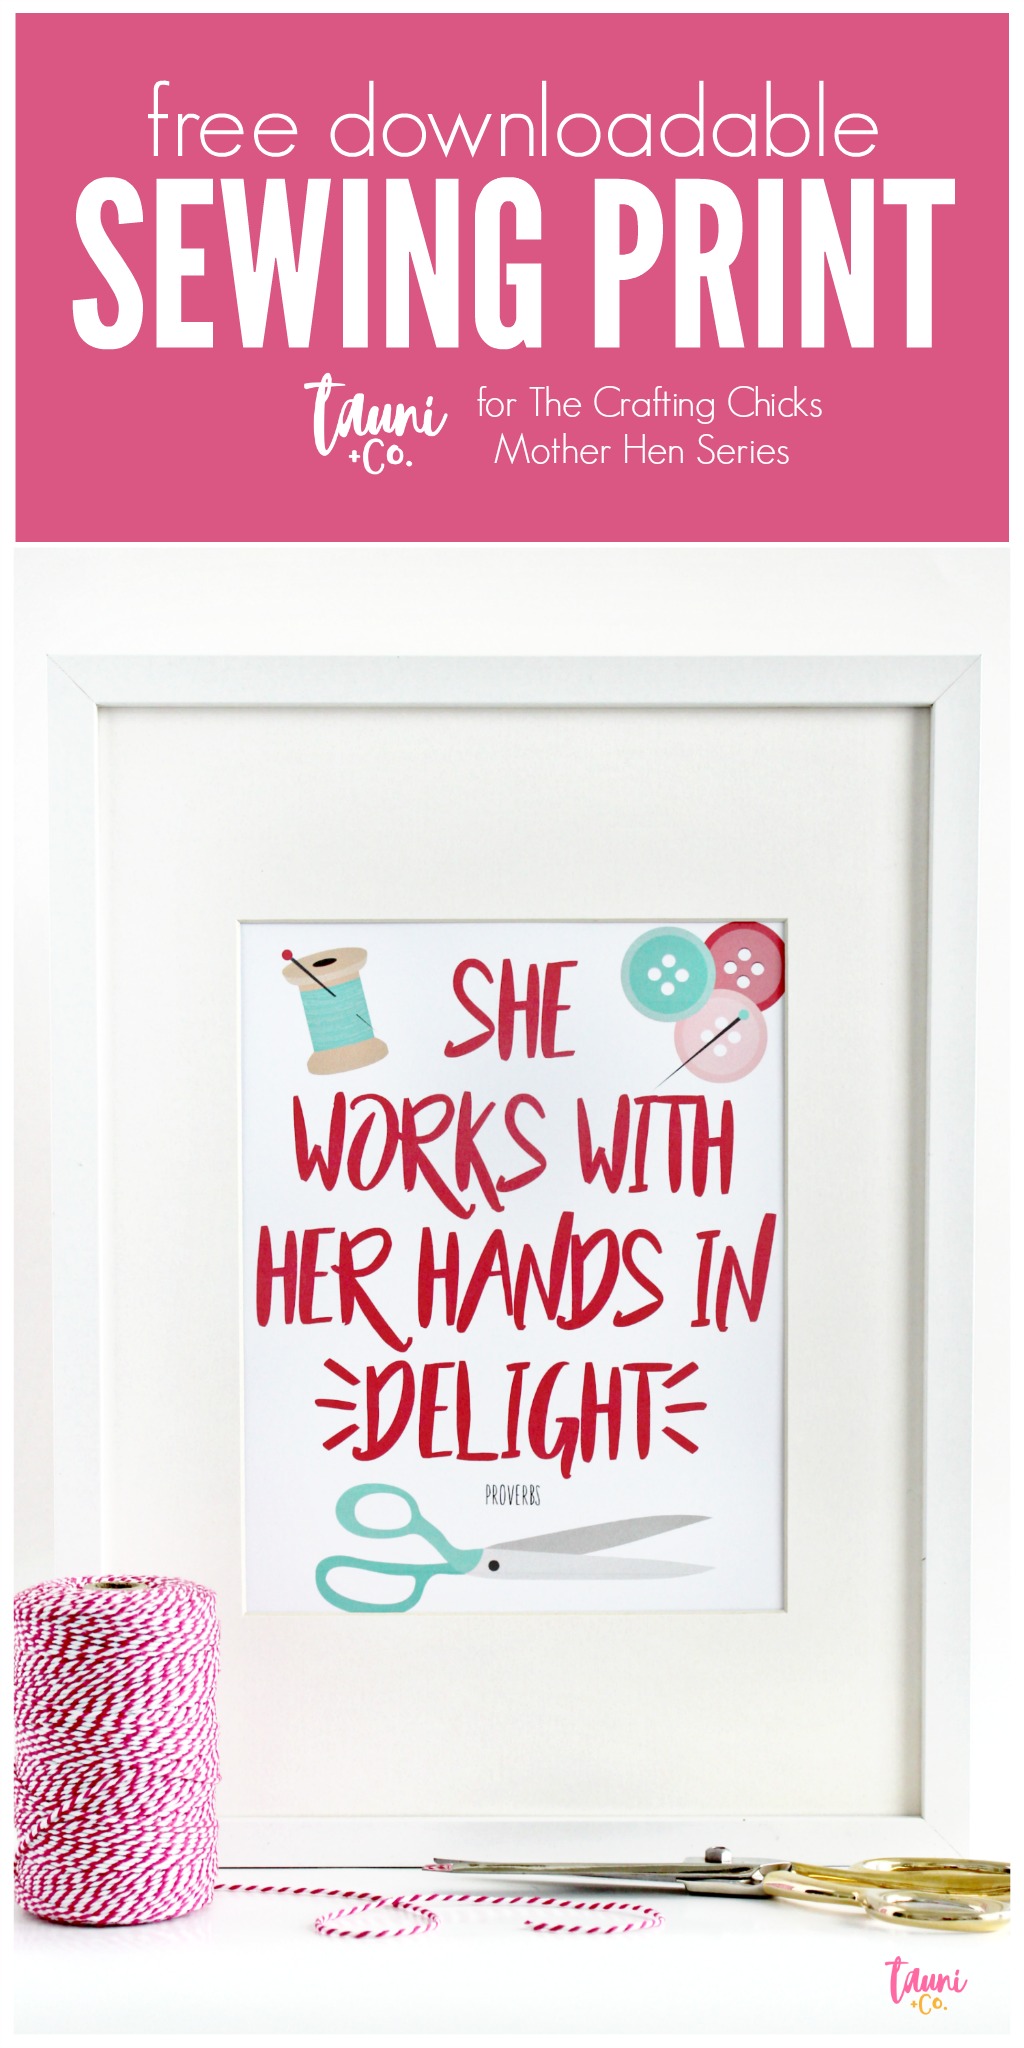 https://thecraftingchicks.com/wp-content/uploads/2017/07/She-Works-with-Her-Hands-in-Delight-Sewing-Printable-Hero-%C2%A9-Tauni-Everett.jpg